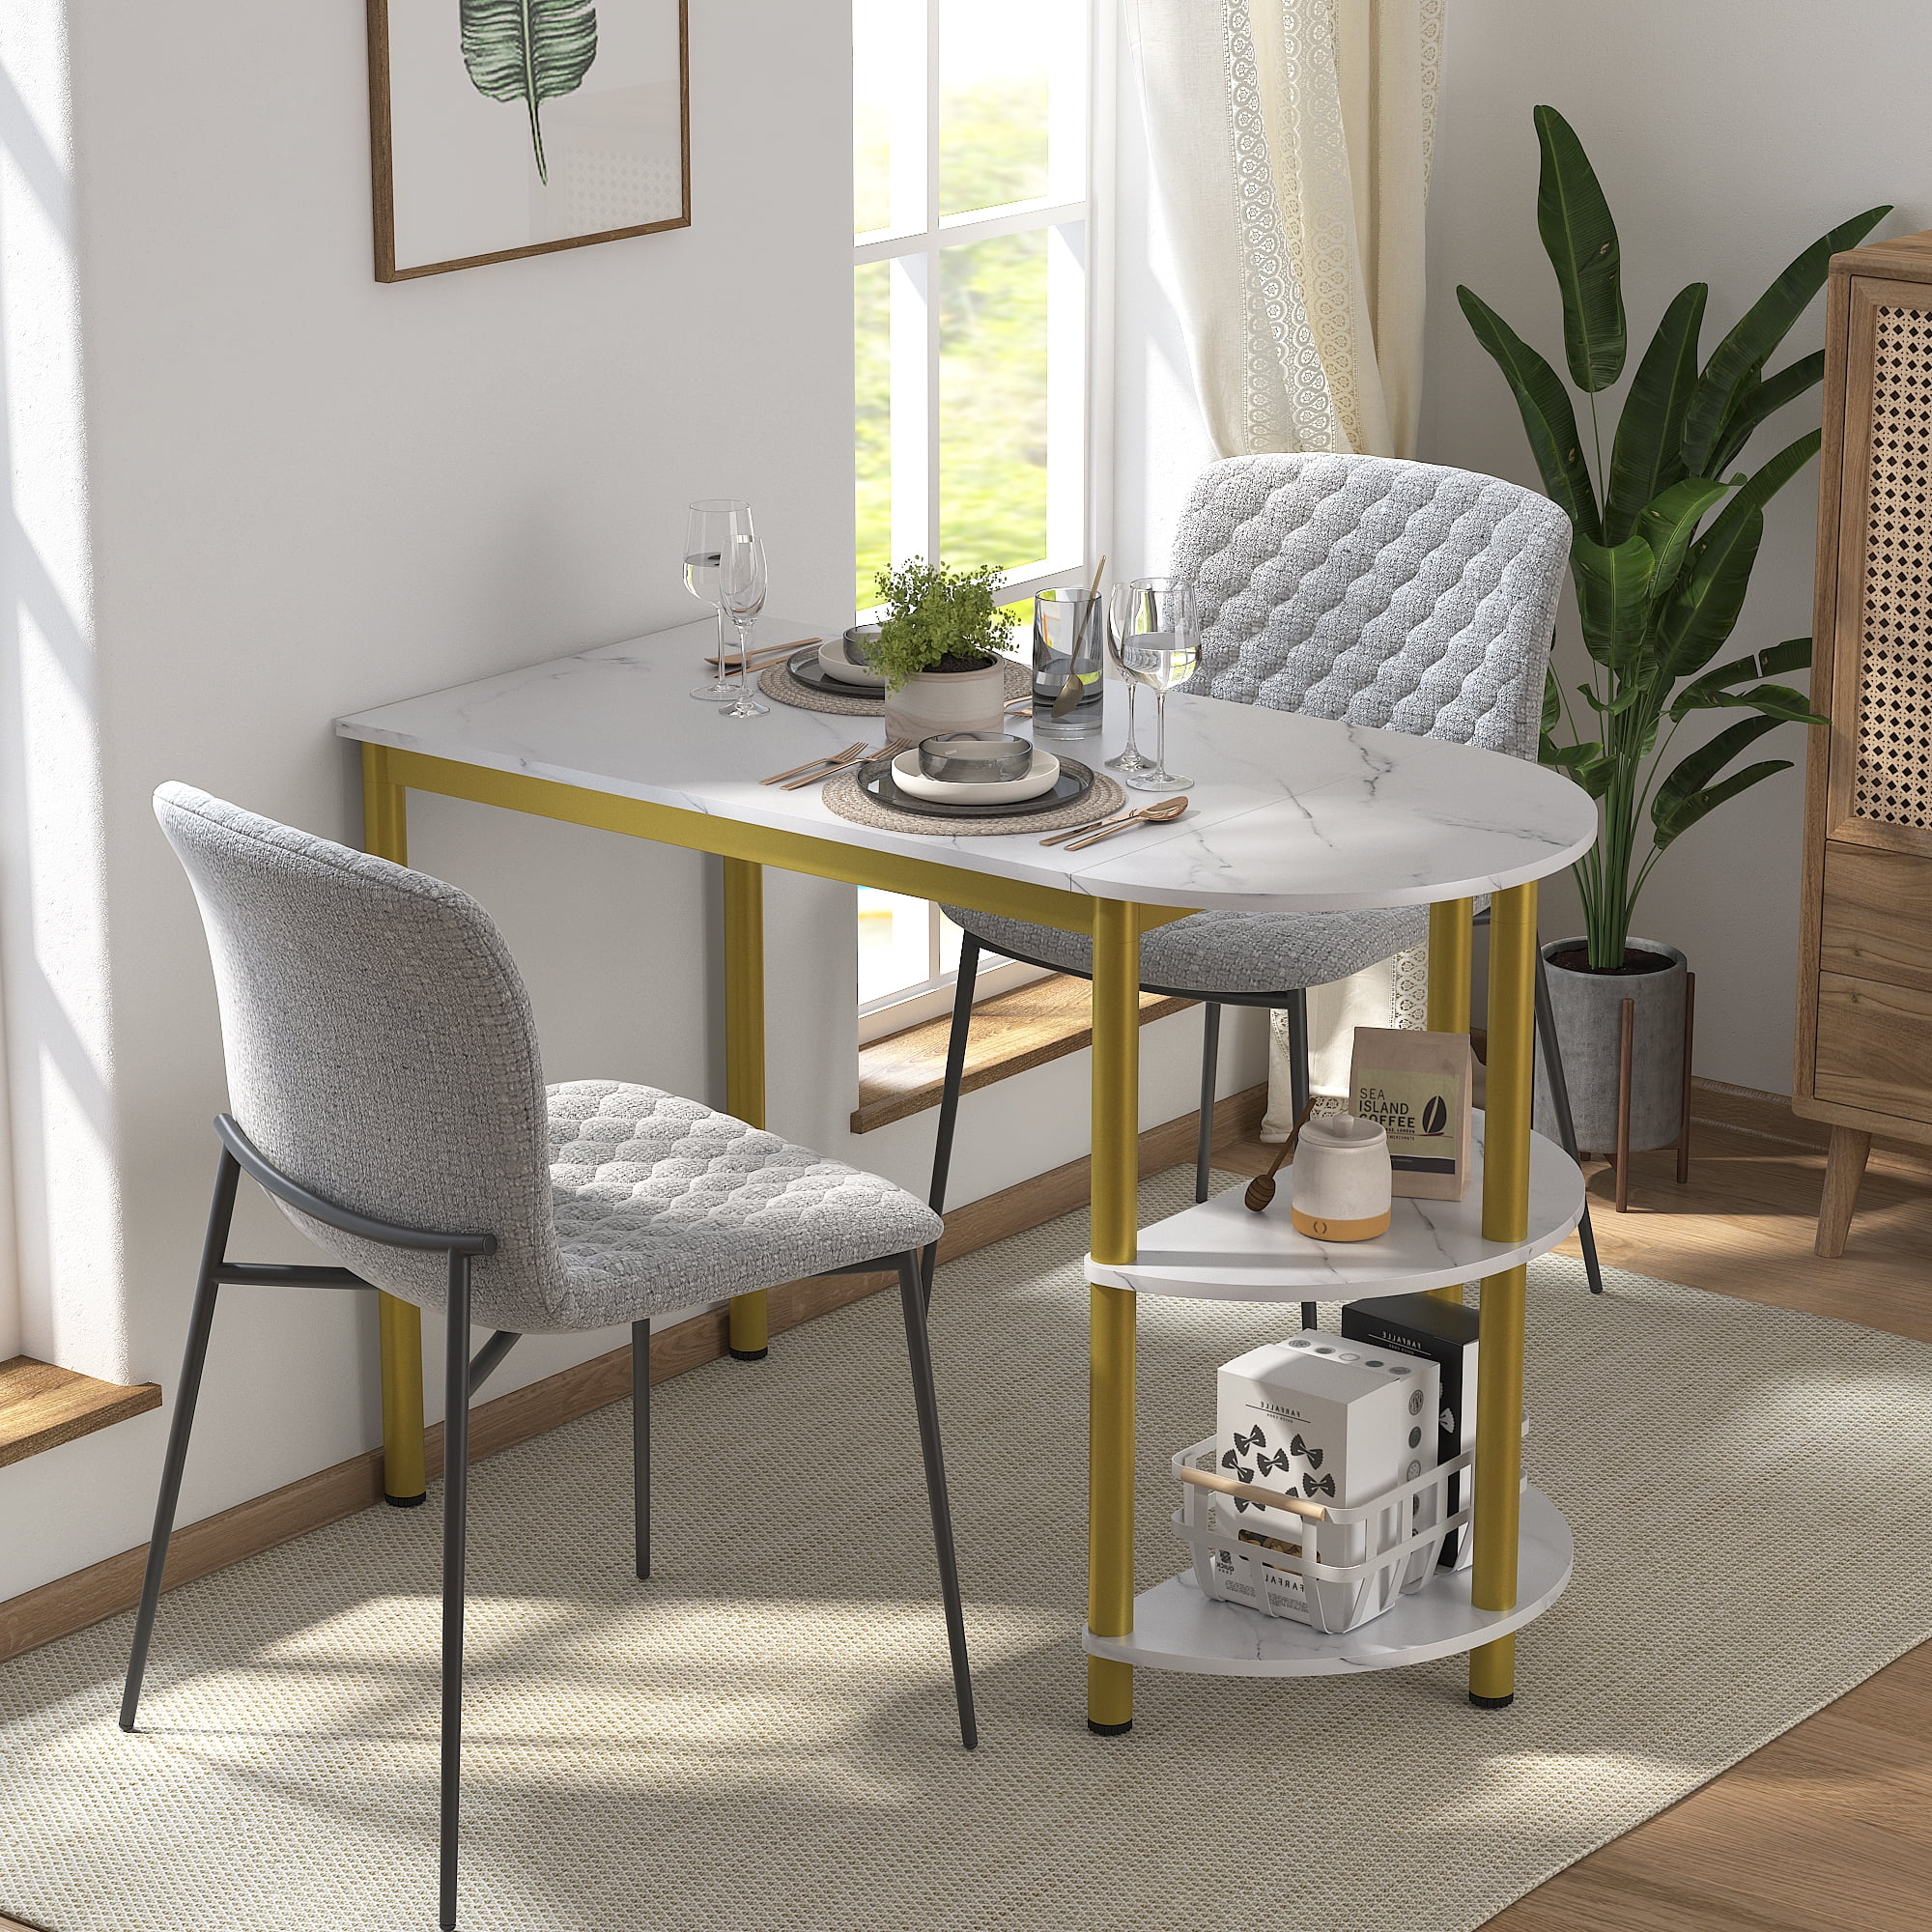 Yoneston Dining Table for Small Space Kitchen Dining Room Table